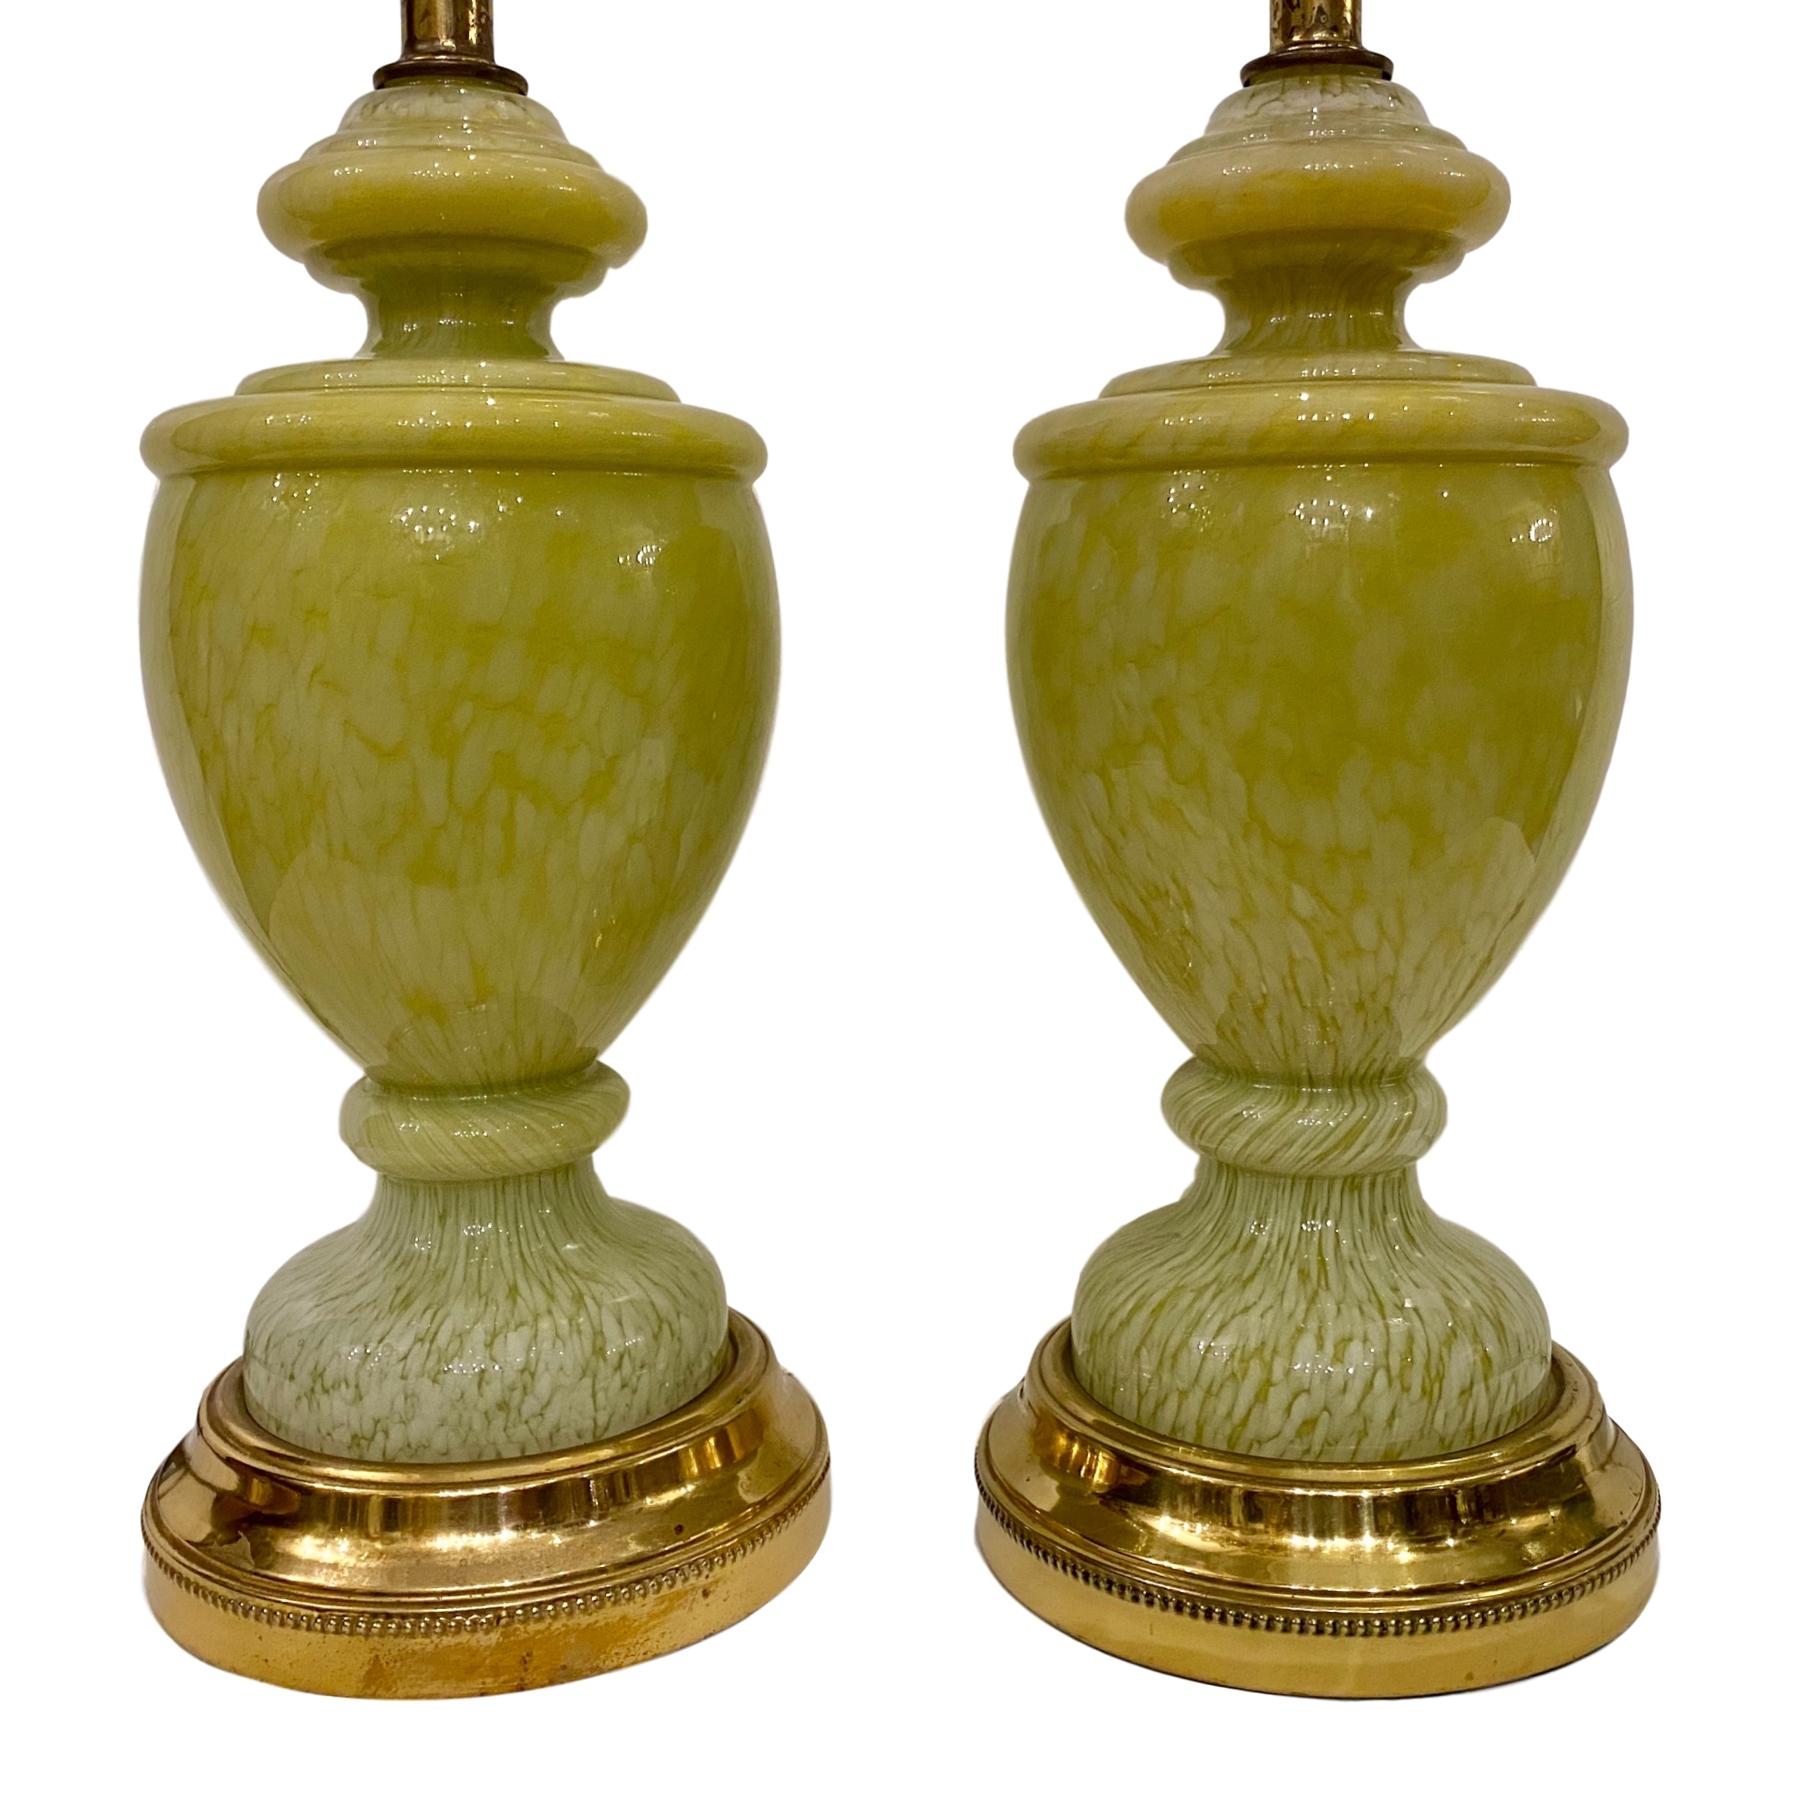 A pair of circa late 1940s French pale green colored art glass table lamps with gilt bases.

Measurements:
Height of body 16